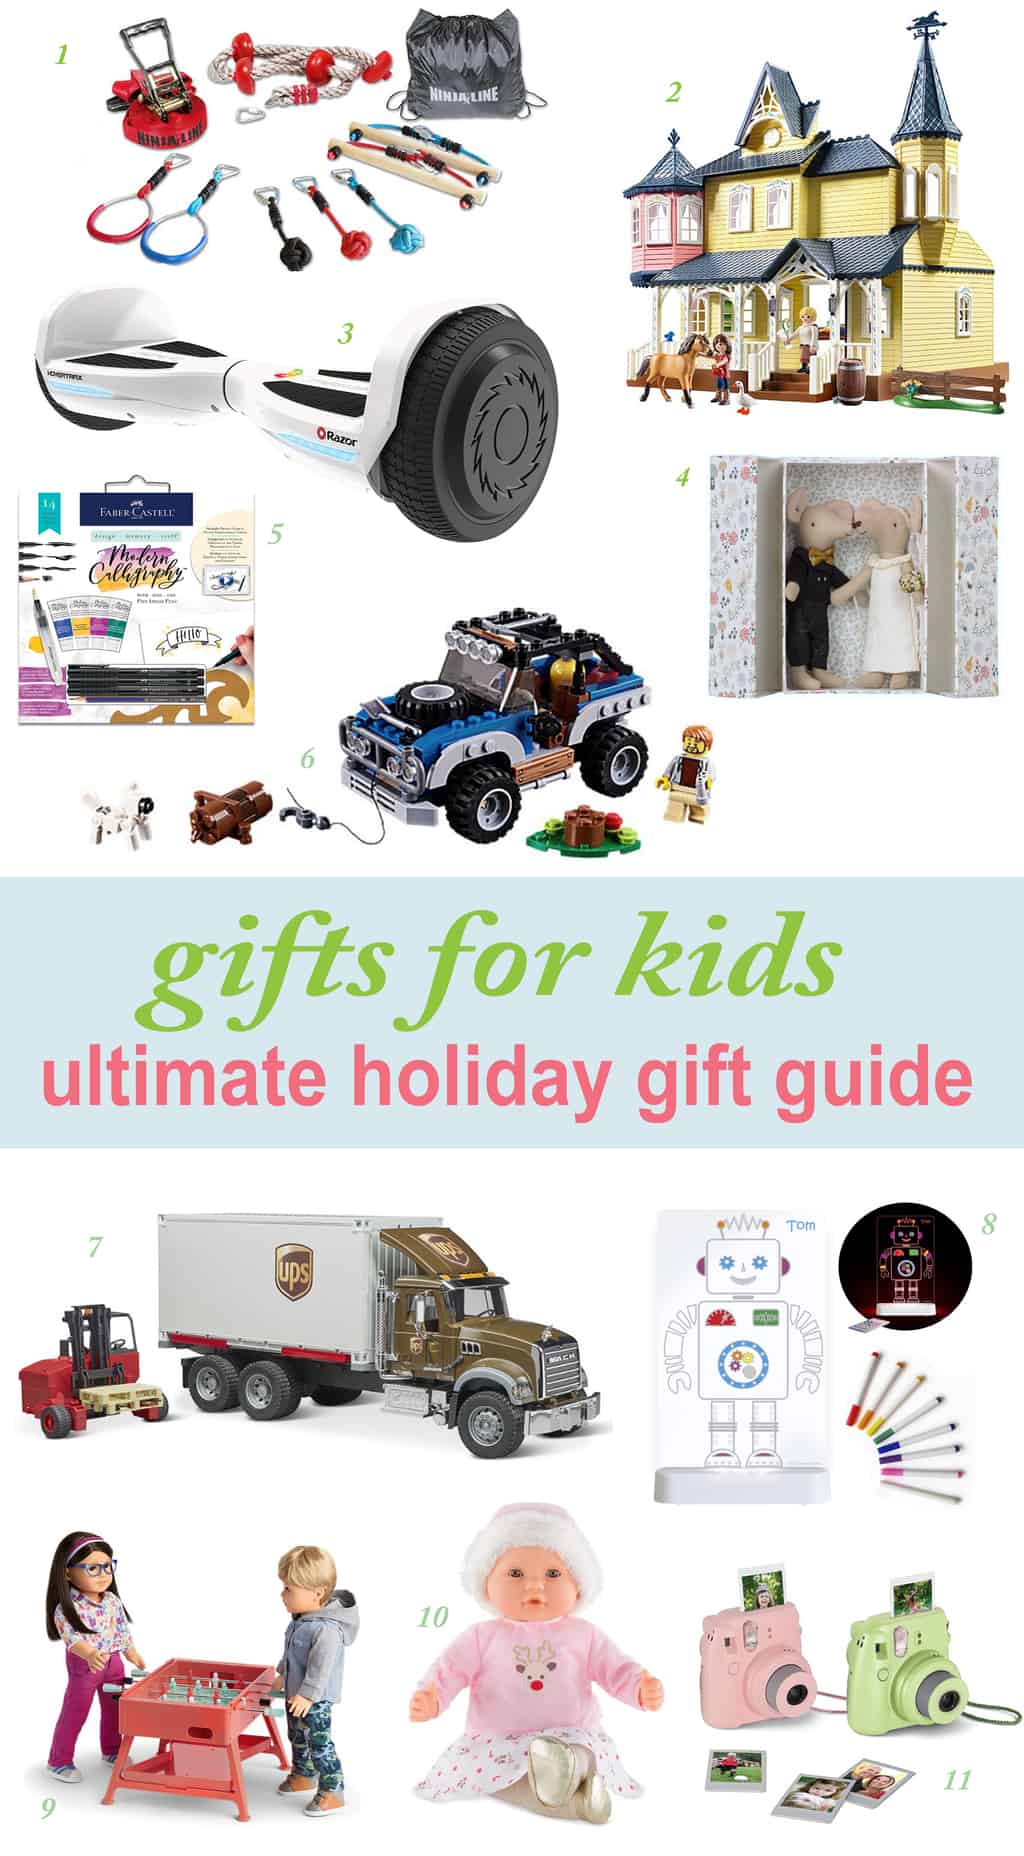 Kids holiday gift guide